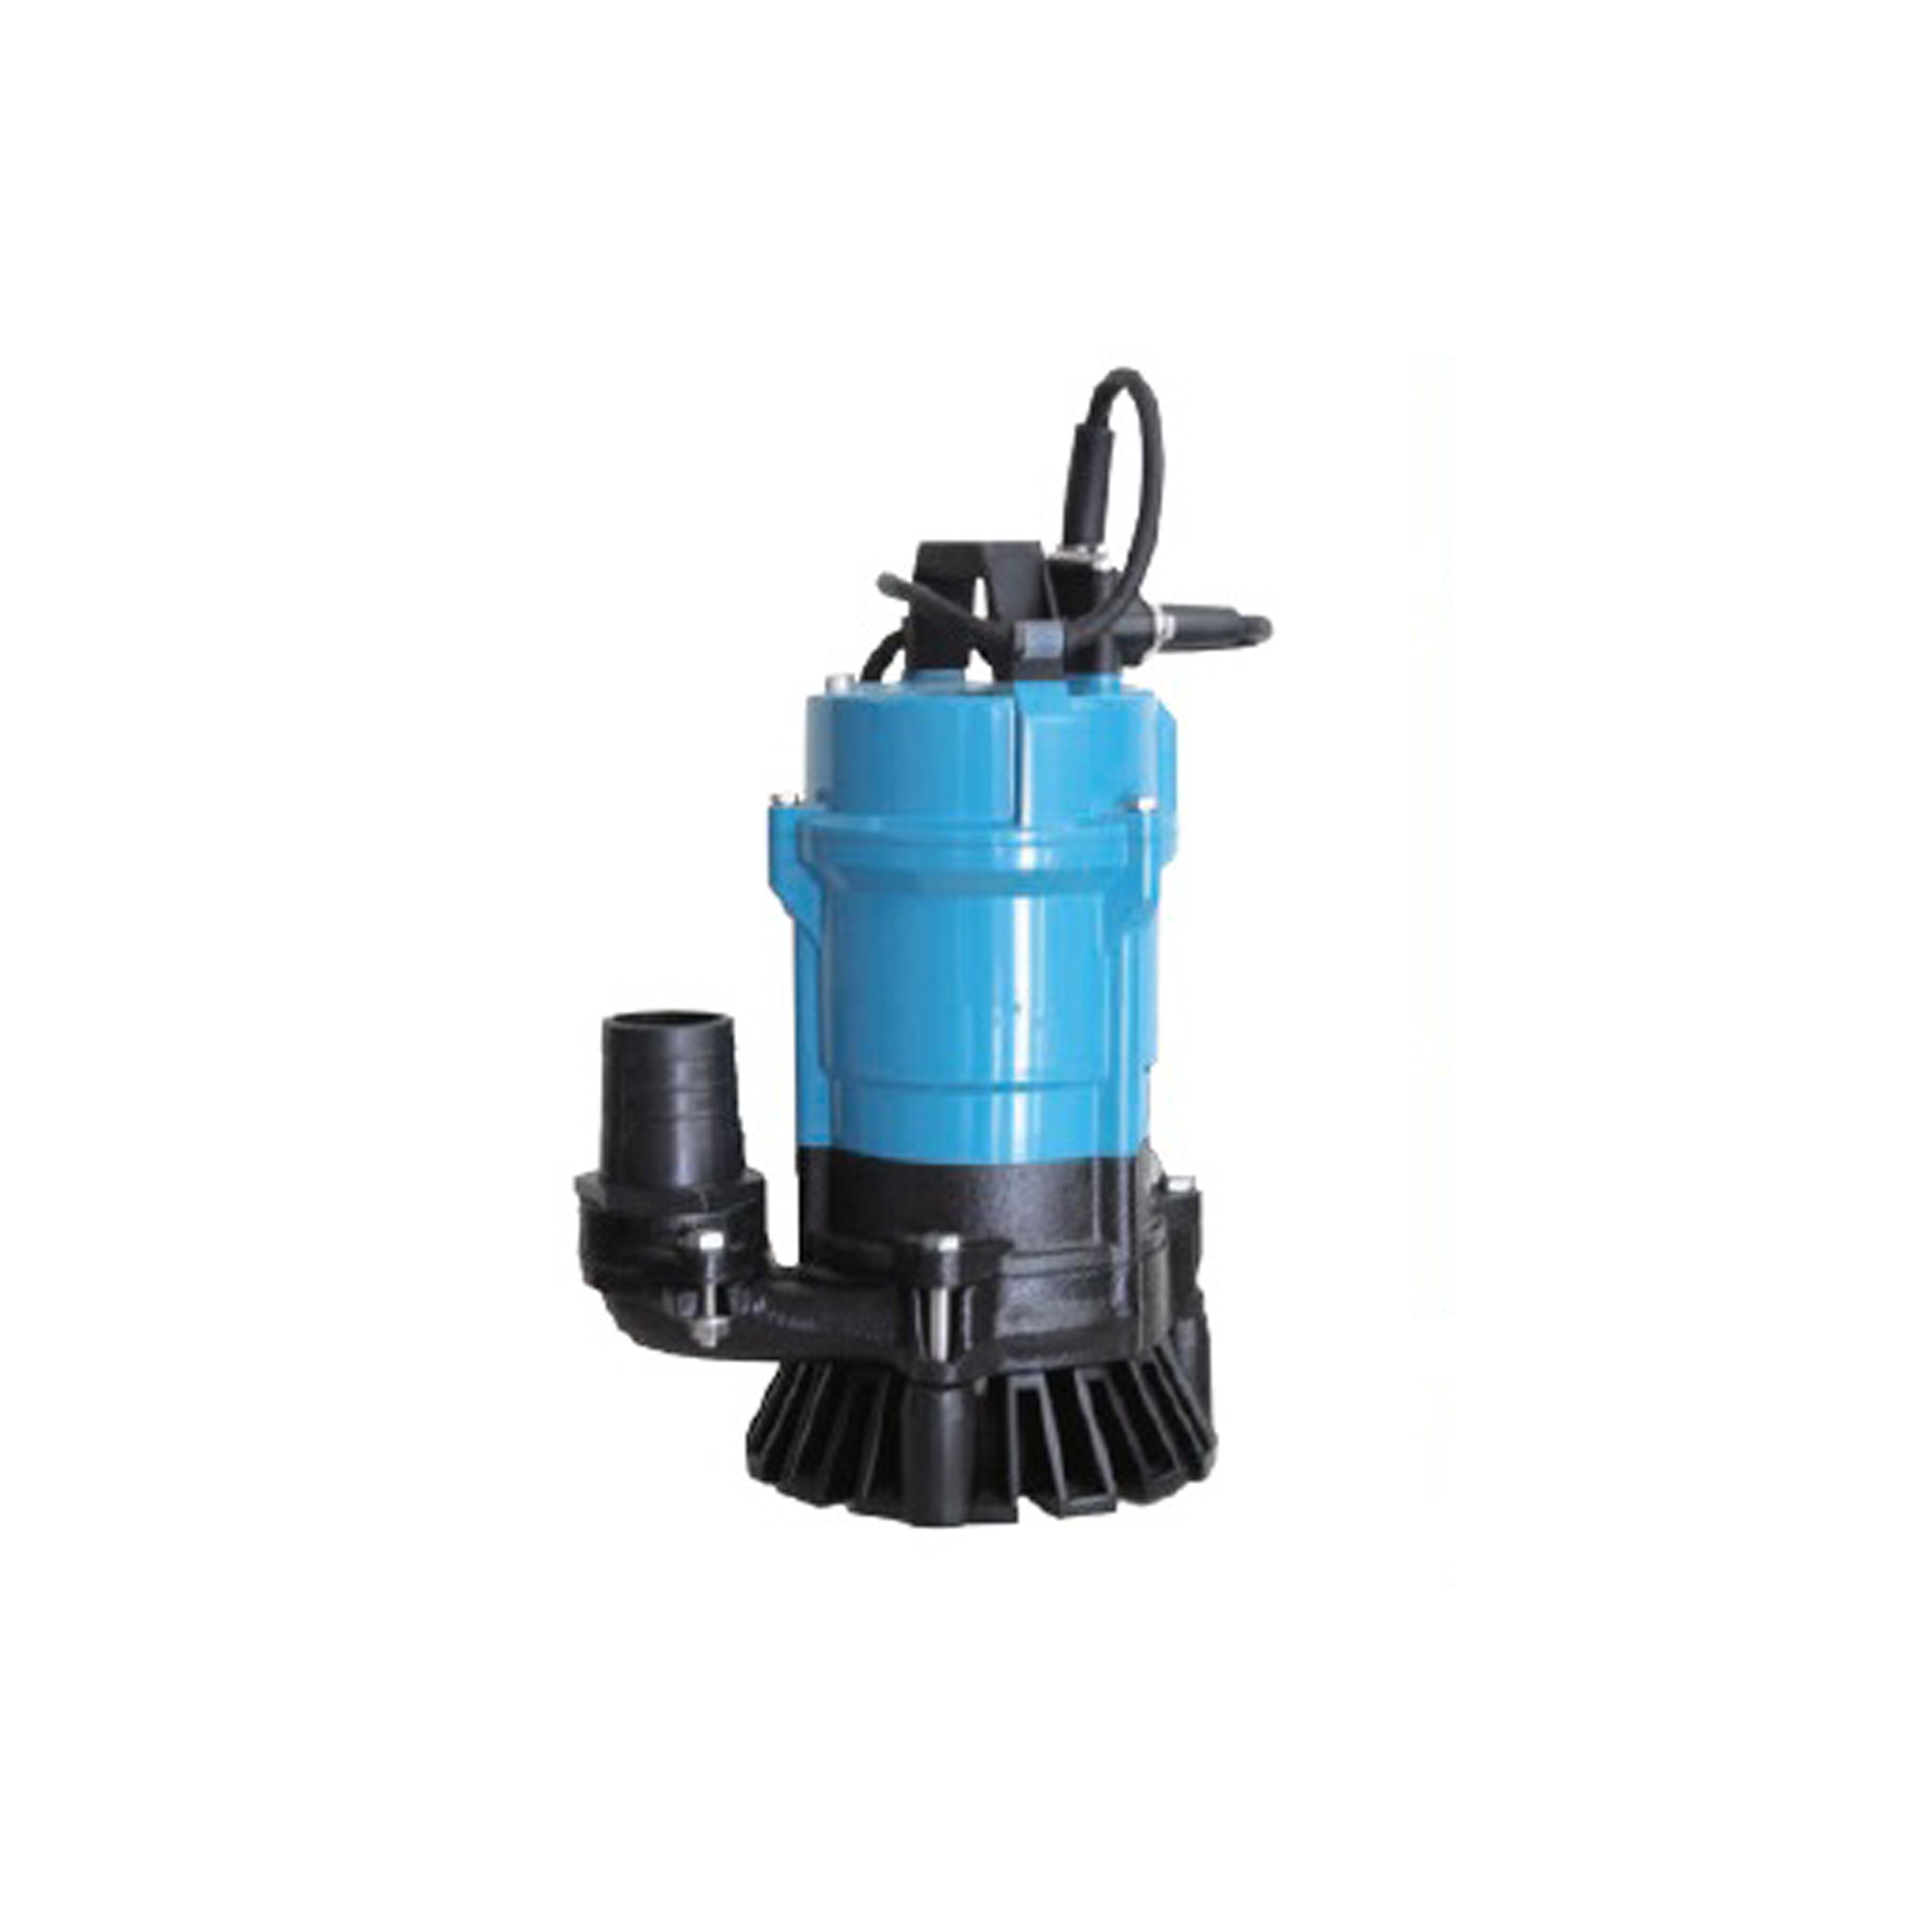 Gol Pumps, Sewage-Waste Drainage Submersible Water Pump 1 HP, Max. Flow 5520 GPH, Horsepower 1 HP, Port Size 2 in, Model HM 10MA50 KW 0.75 240V 60HZ